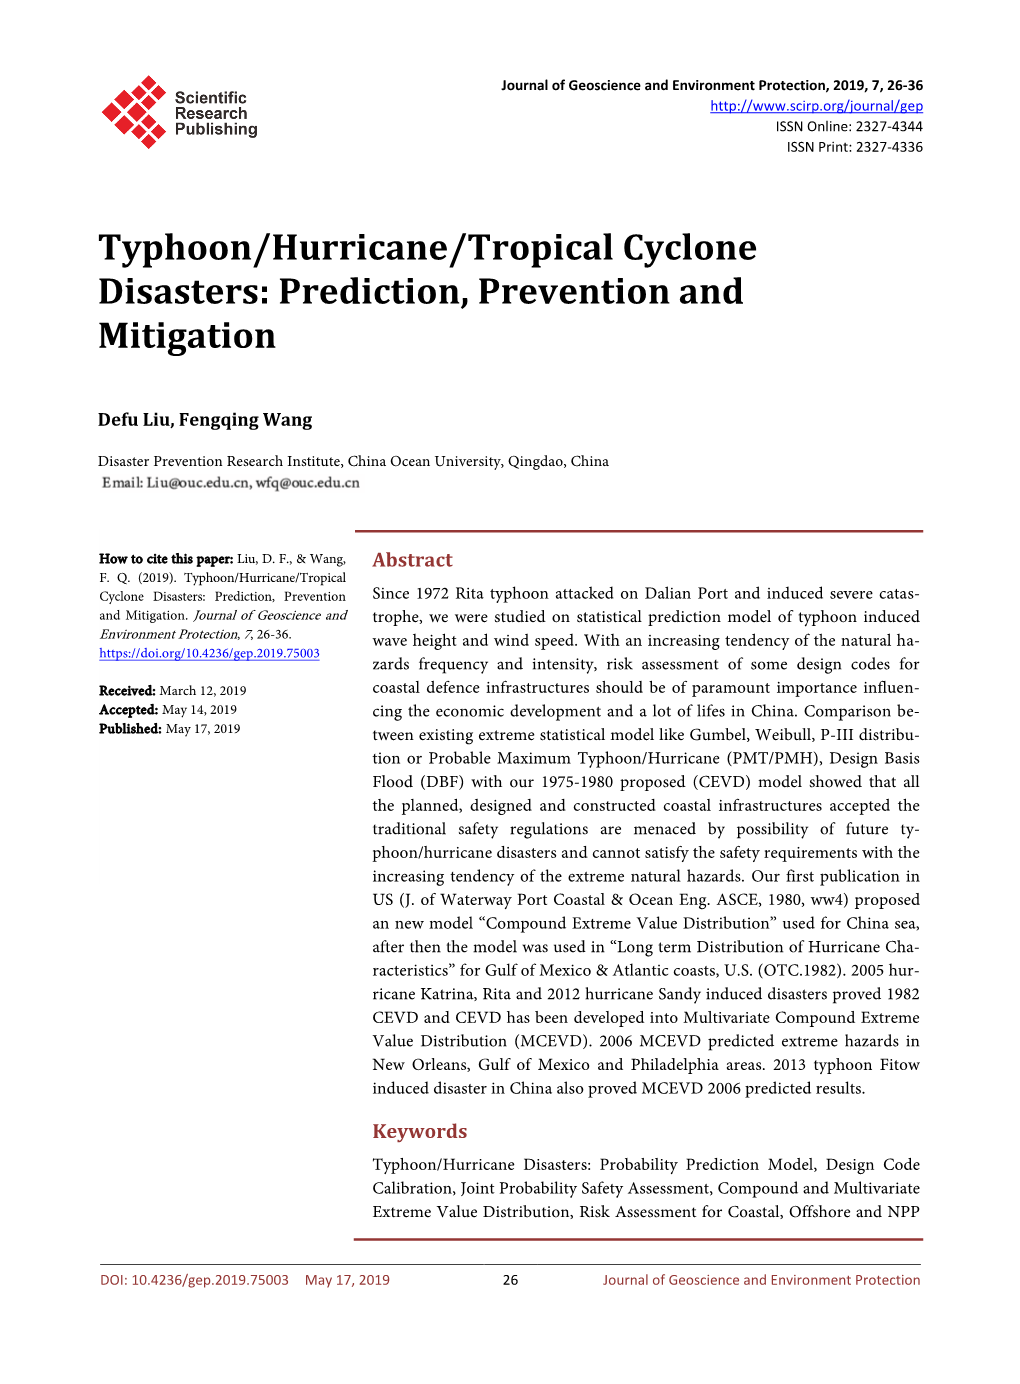 Typhoon/Hurricane/Tropical Cyclone Disasters: Prediction, Prevention and Mitigation